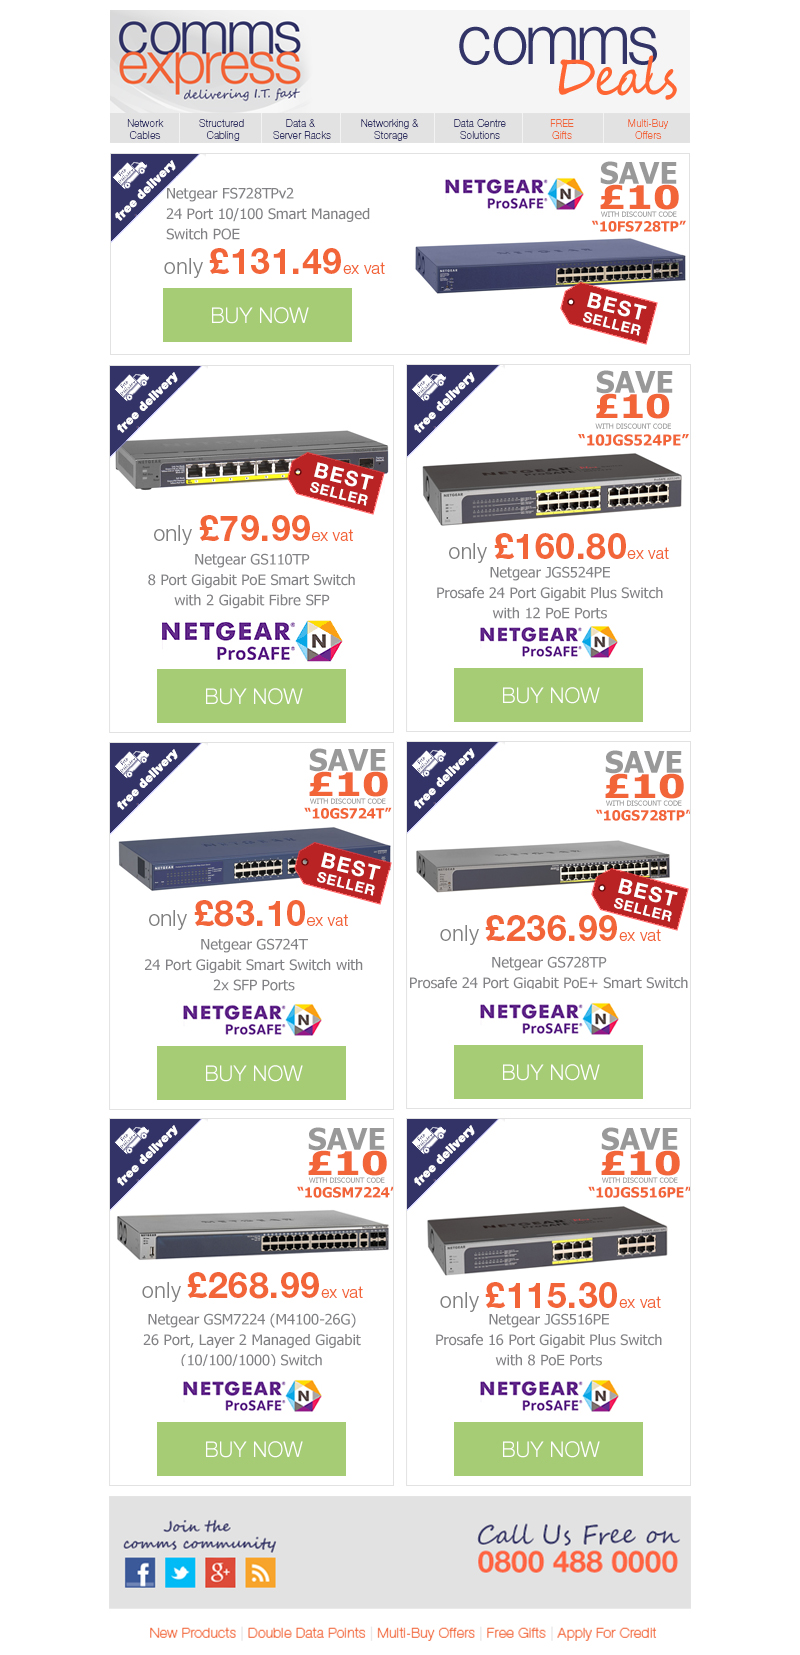 Save £10 on Selected NETGEAR ProSafe Switches